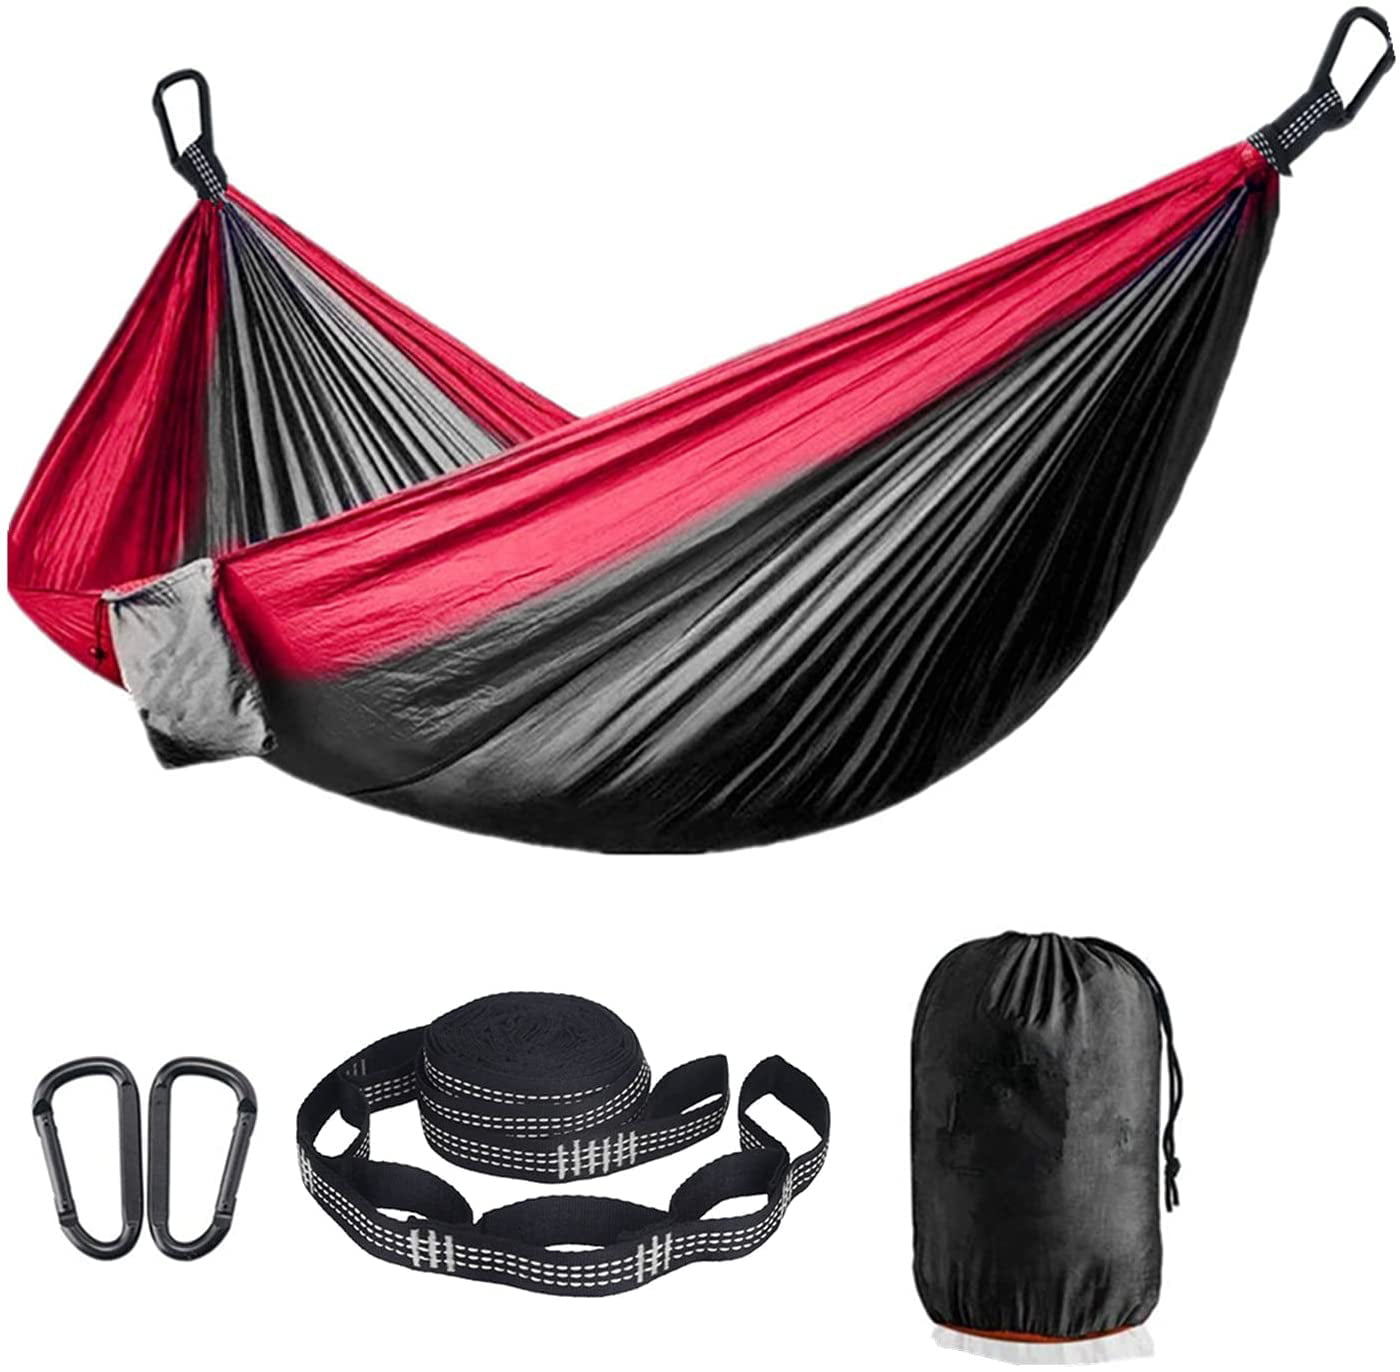 Indoor Camping Hammocks Patio Yard Garden Backyard Porch Travel 1/2 Person Hammock for Travel with Carrying Bag for Outdoor 